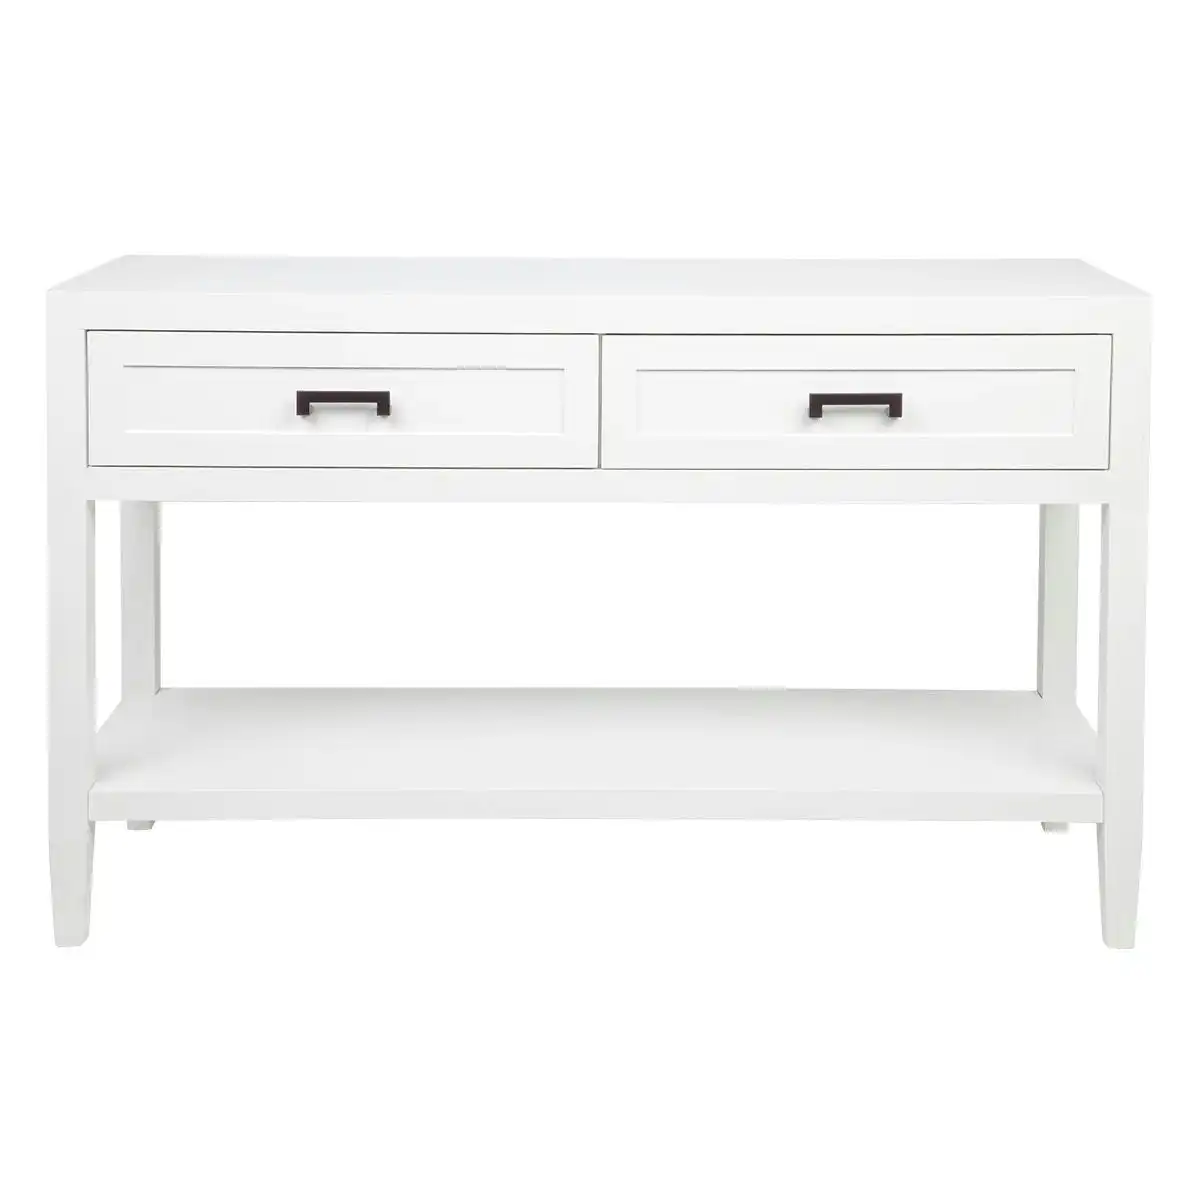 Soloman Console Table - Small White - OUTLET NSW